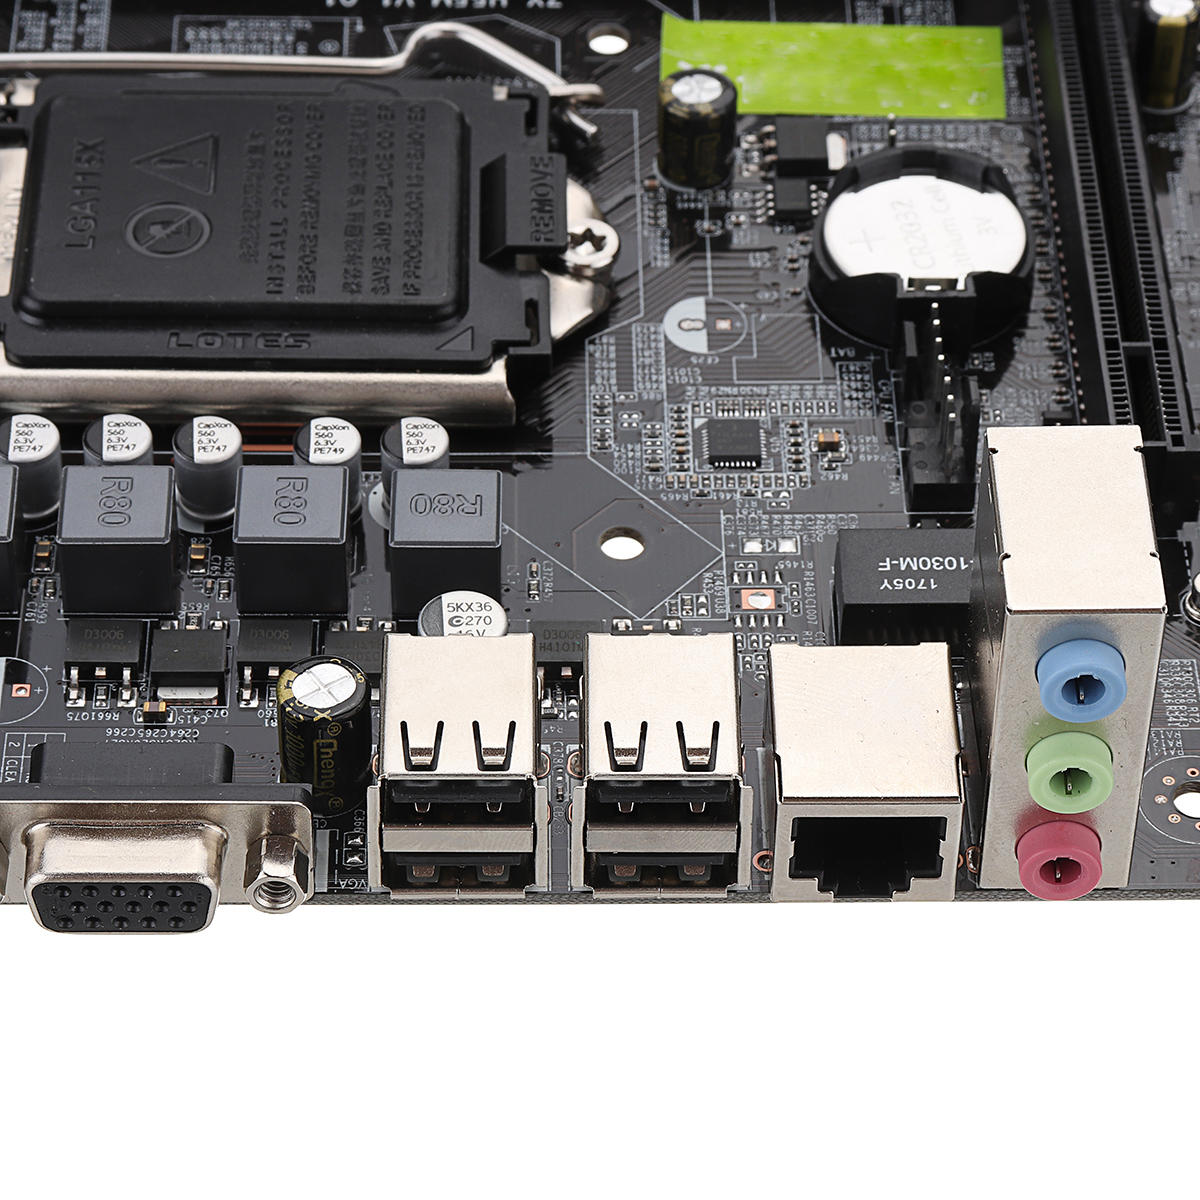 Pm45 1030m F Motherboard Audio Driver